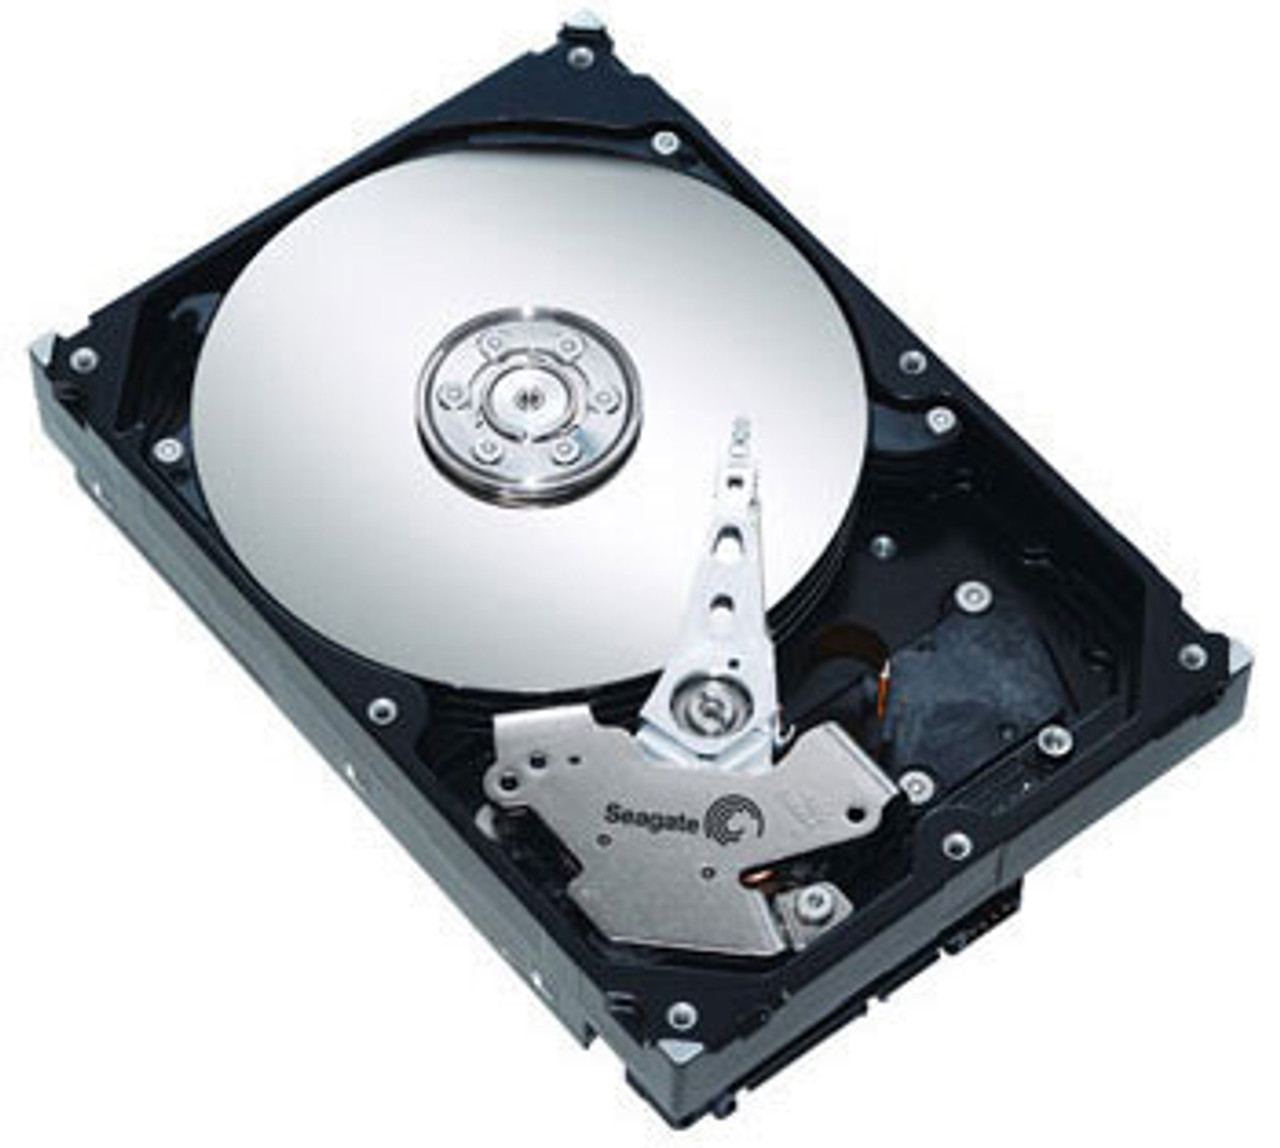 DELL 91K8T 3tb 7200rpm 64mb Buffer Sas-6gbits 3.5inch Internal Hard Drive With Tray For Poweredge And Powervault Server